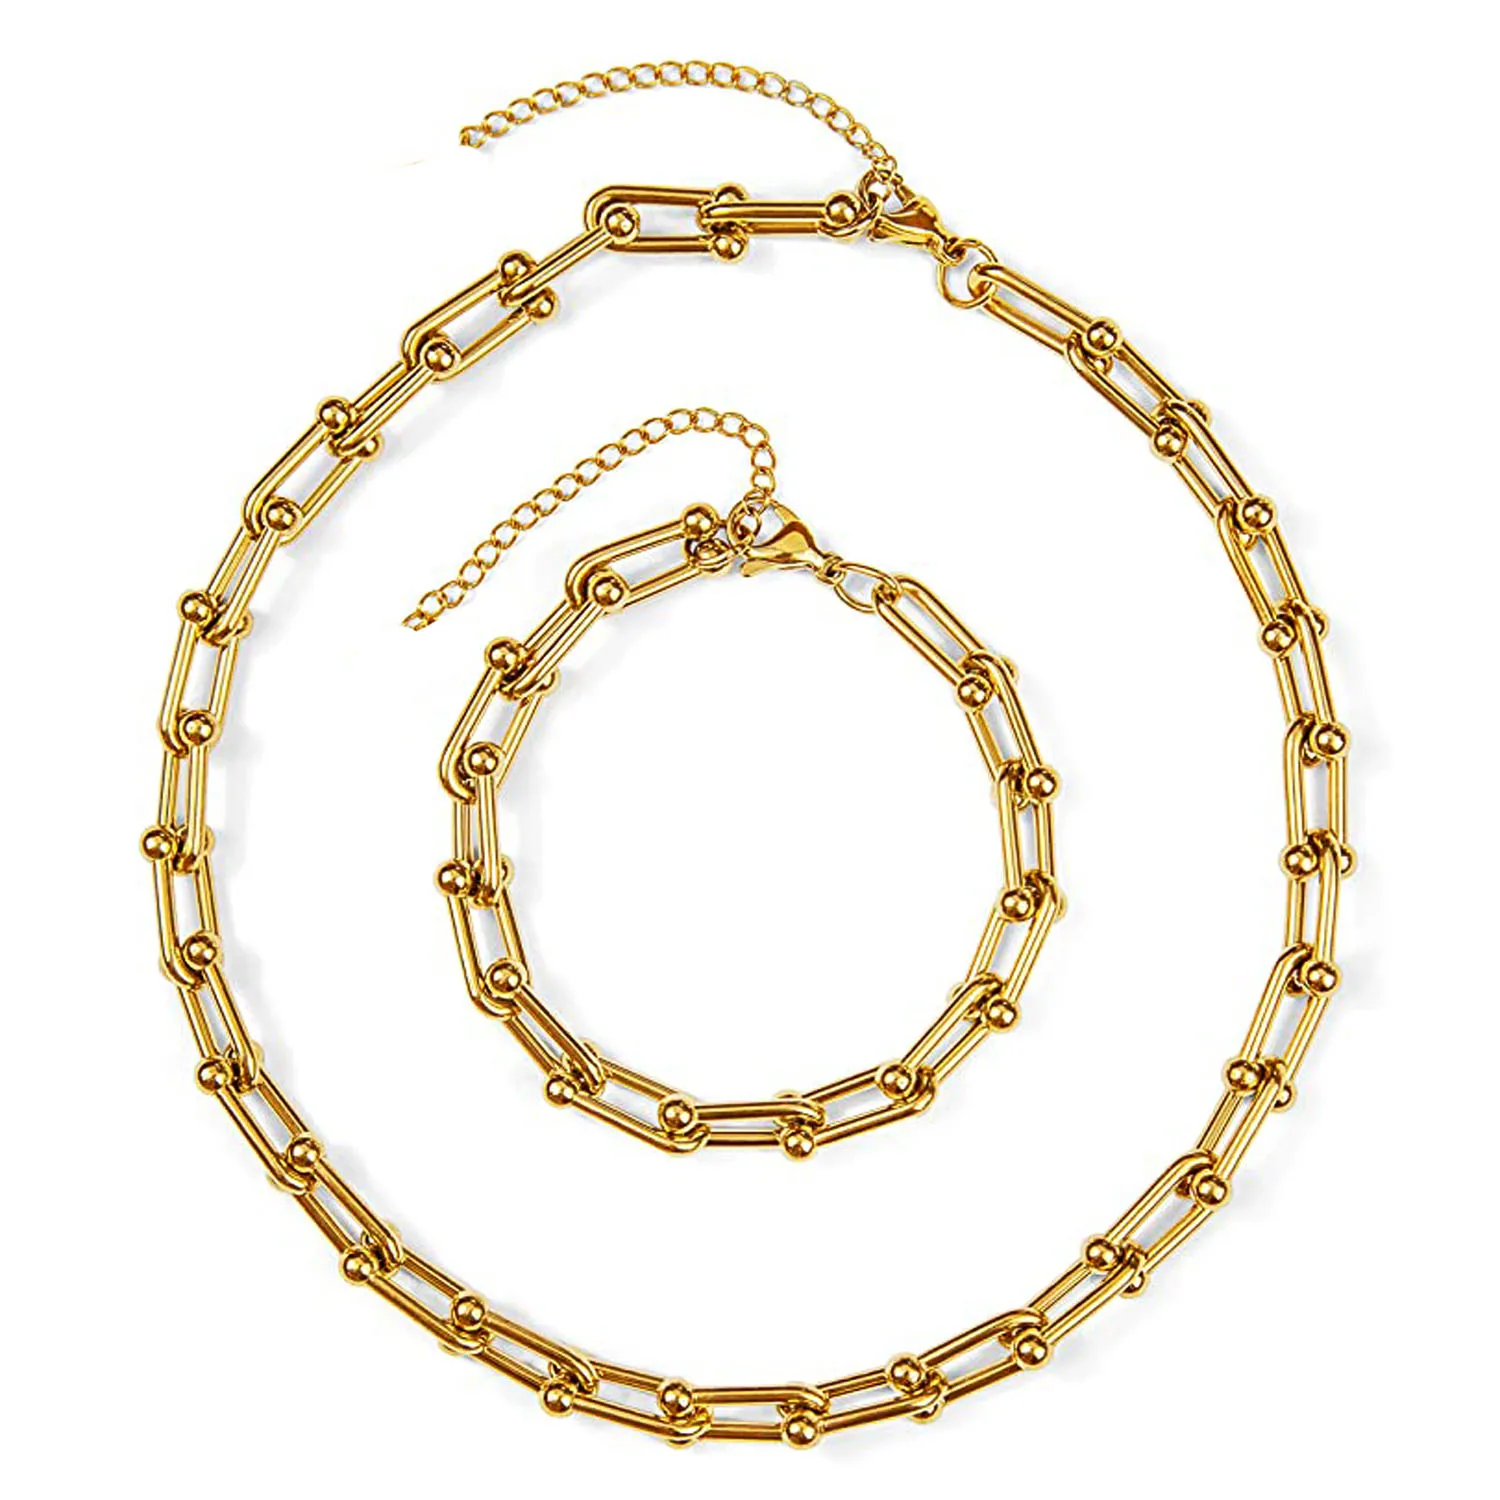 

Thick Link Horseshoe Chain 18K Gold Plated Chunky Horseshoe U Shape Fashion Necklace Chain Bracelet Jewelry Gifts for Women Girl